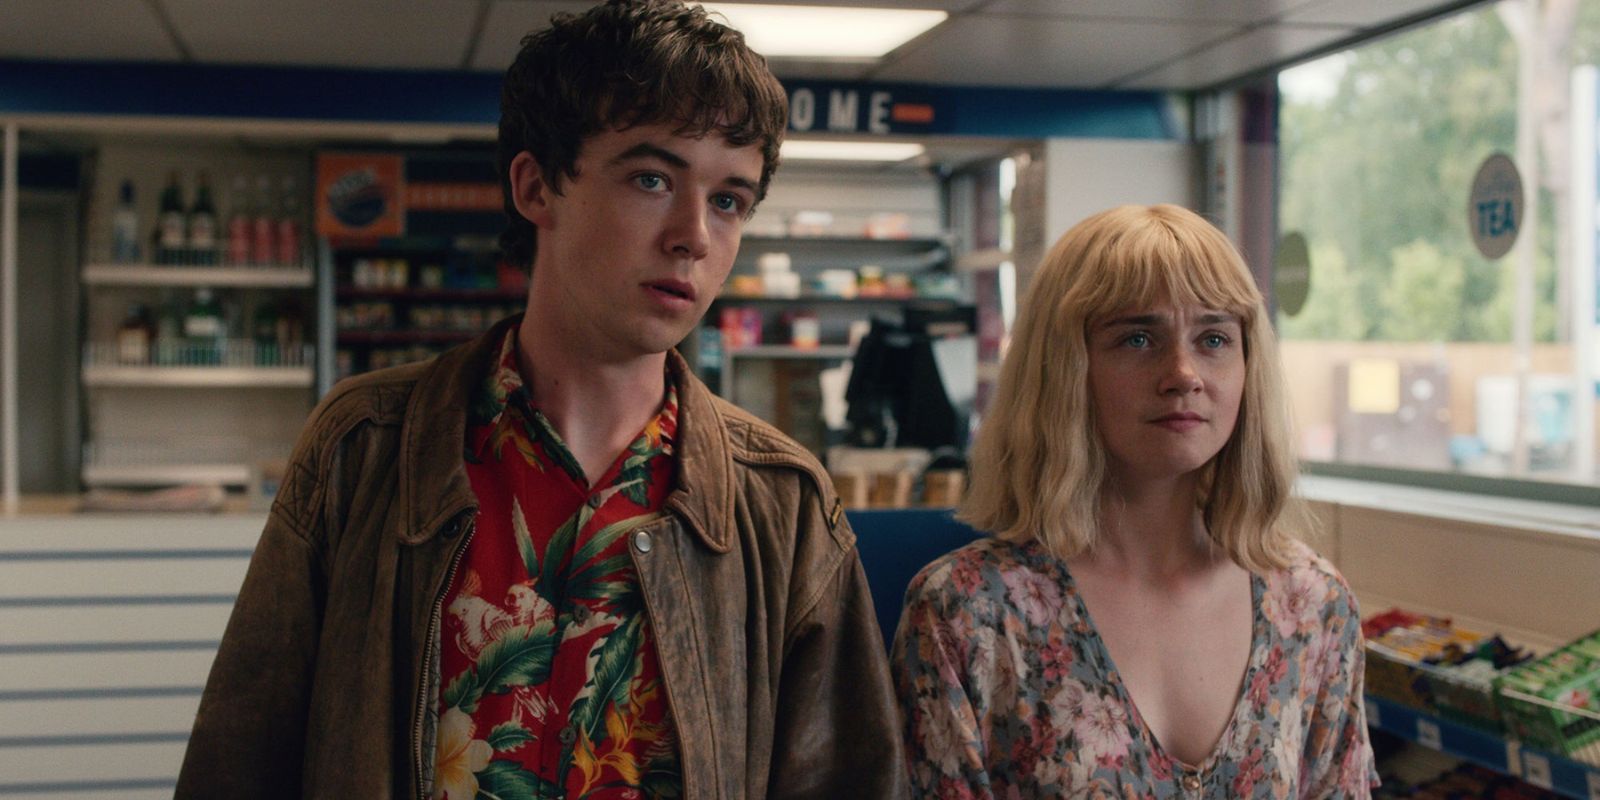 James and Alyssa stand in a store in The End of The F***ing World